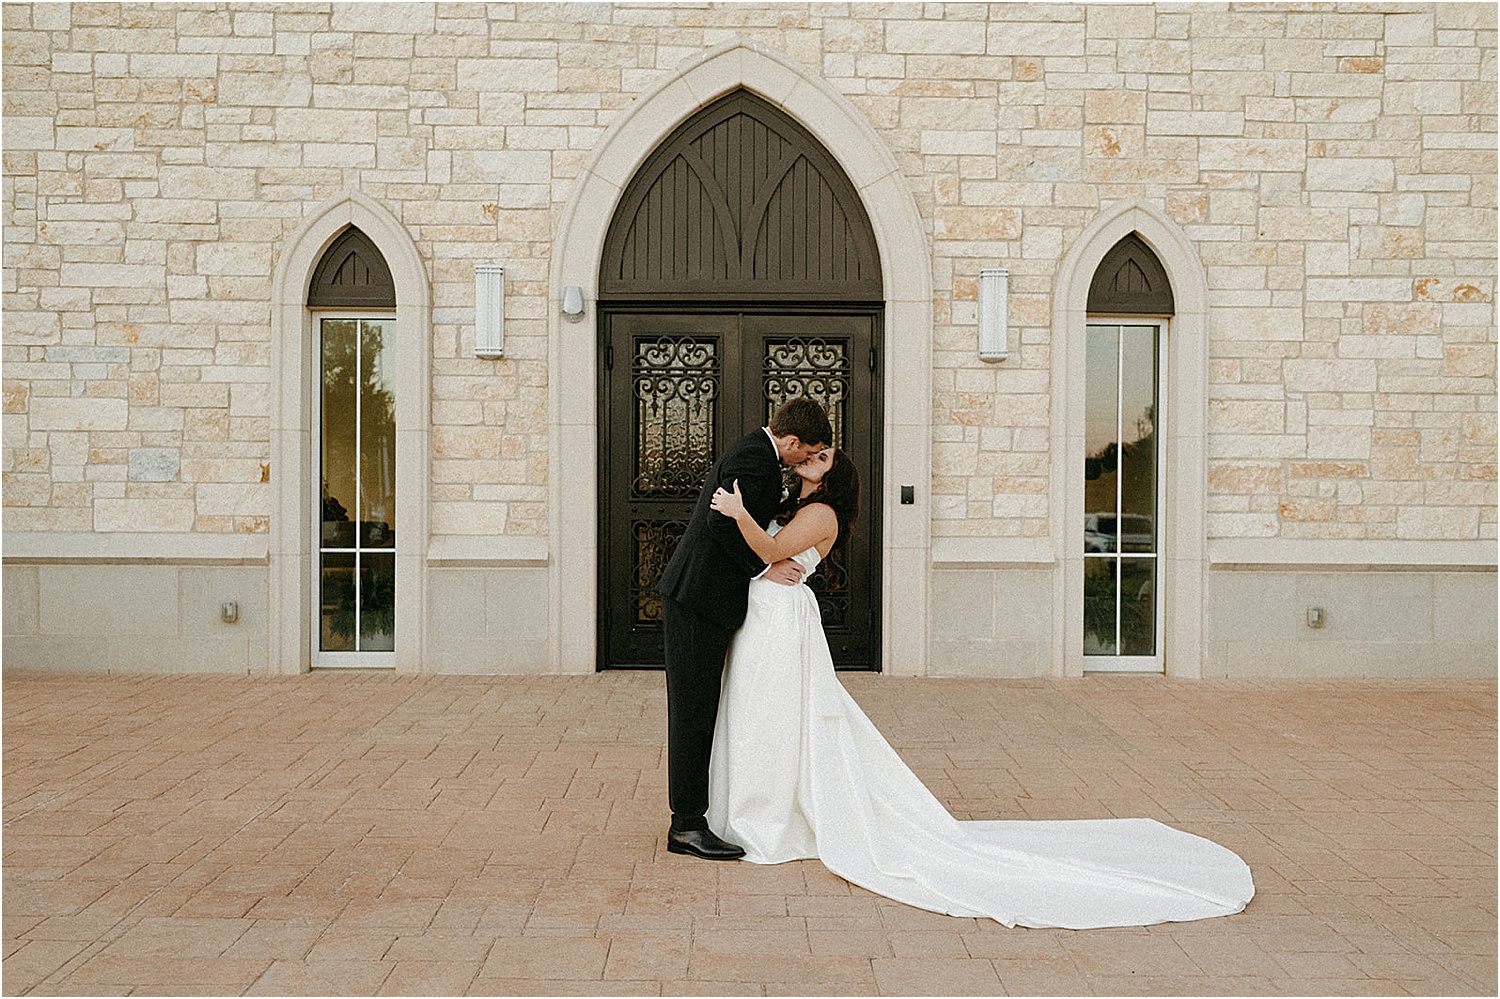 Mady and Stevens wedding at The Bowden by Vanessa Martins Photo